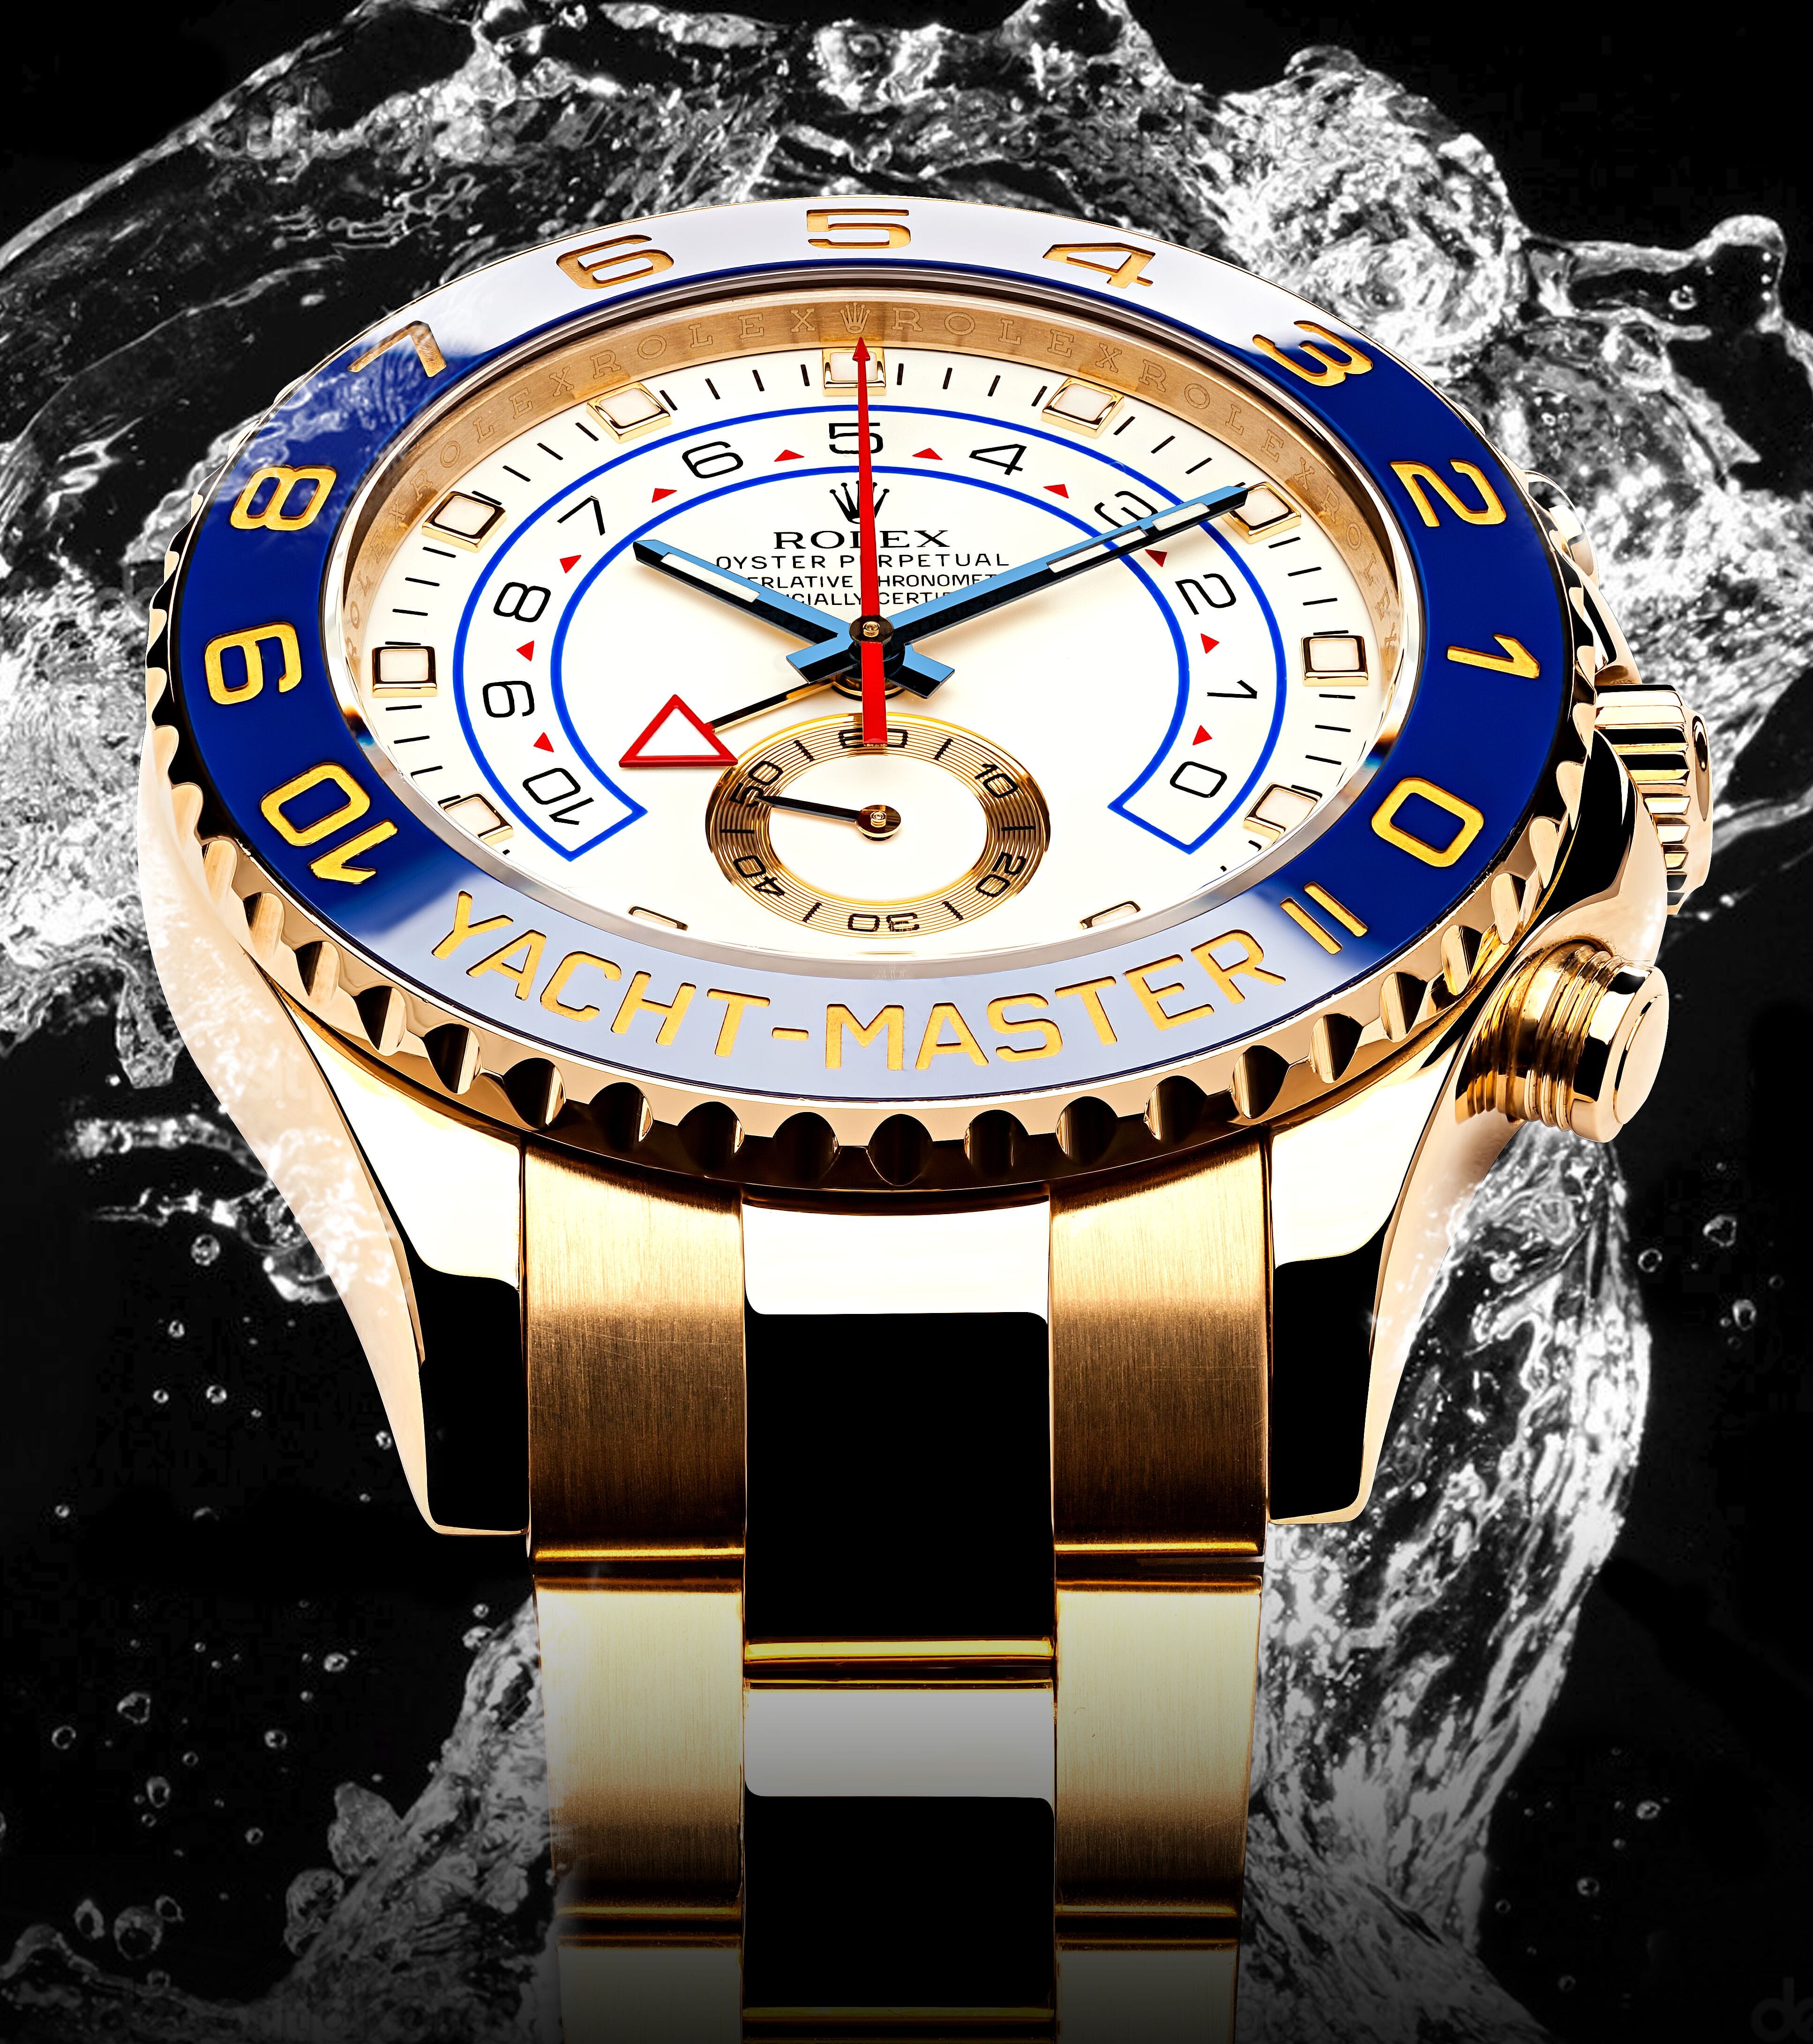 yacht master meaning